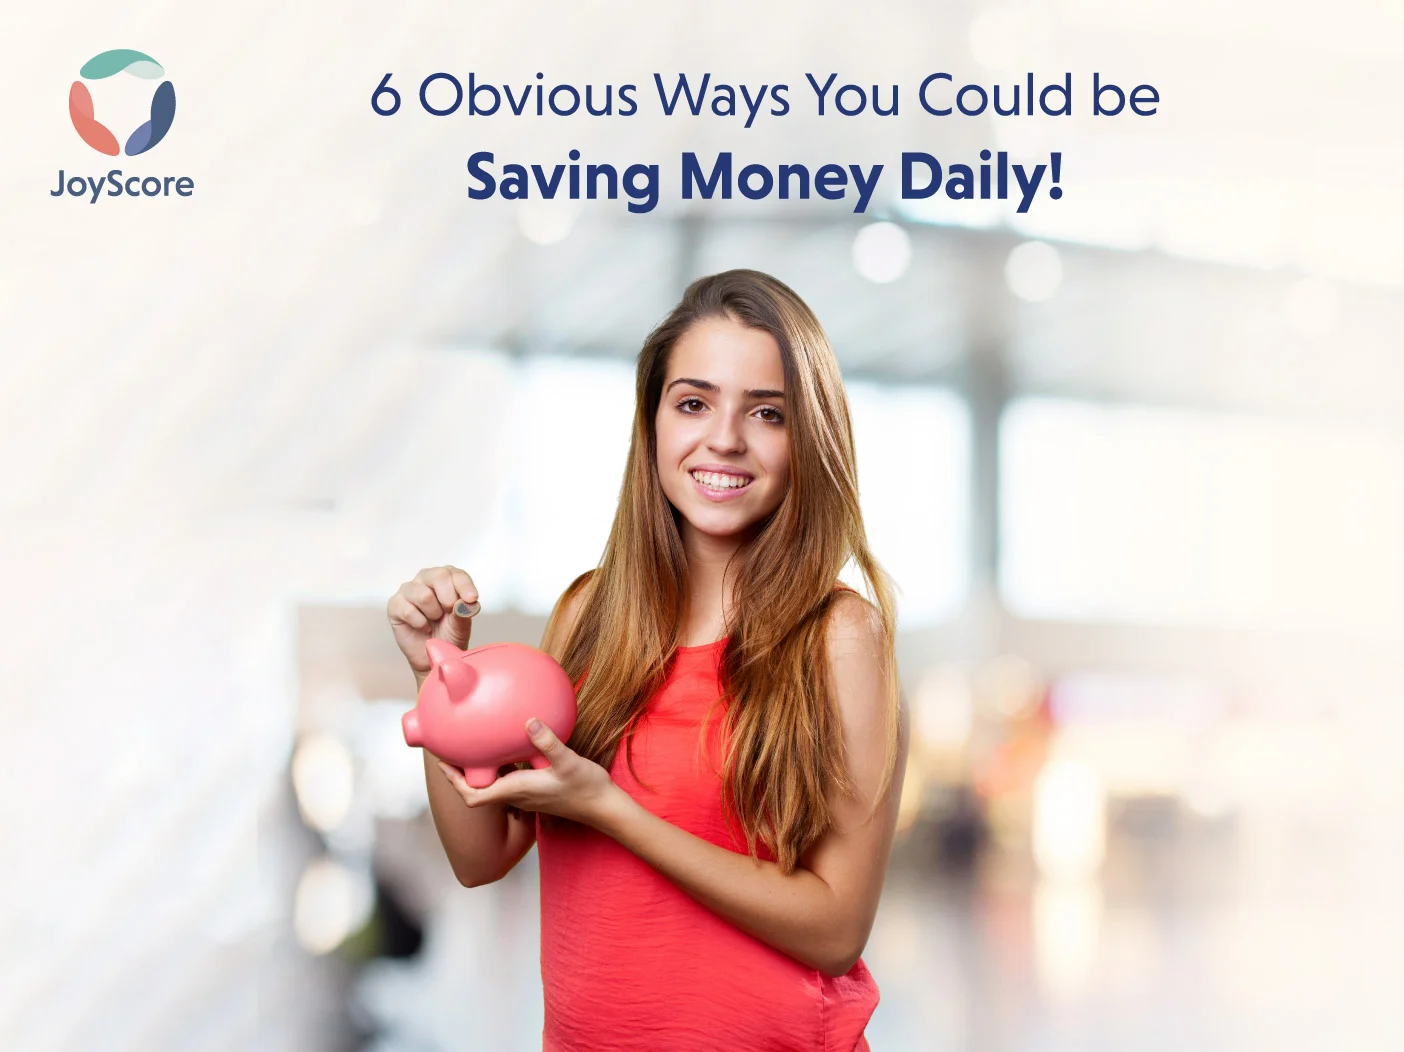 6 obvious ways you could be saving money daily!